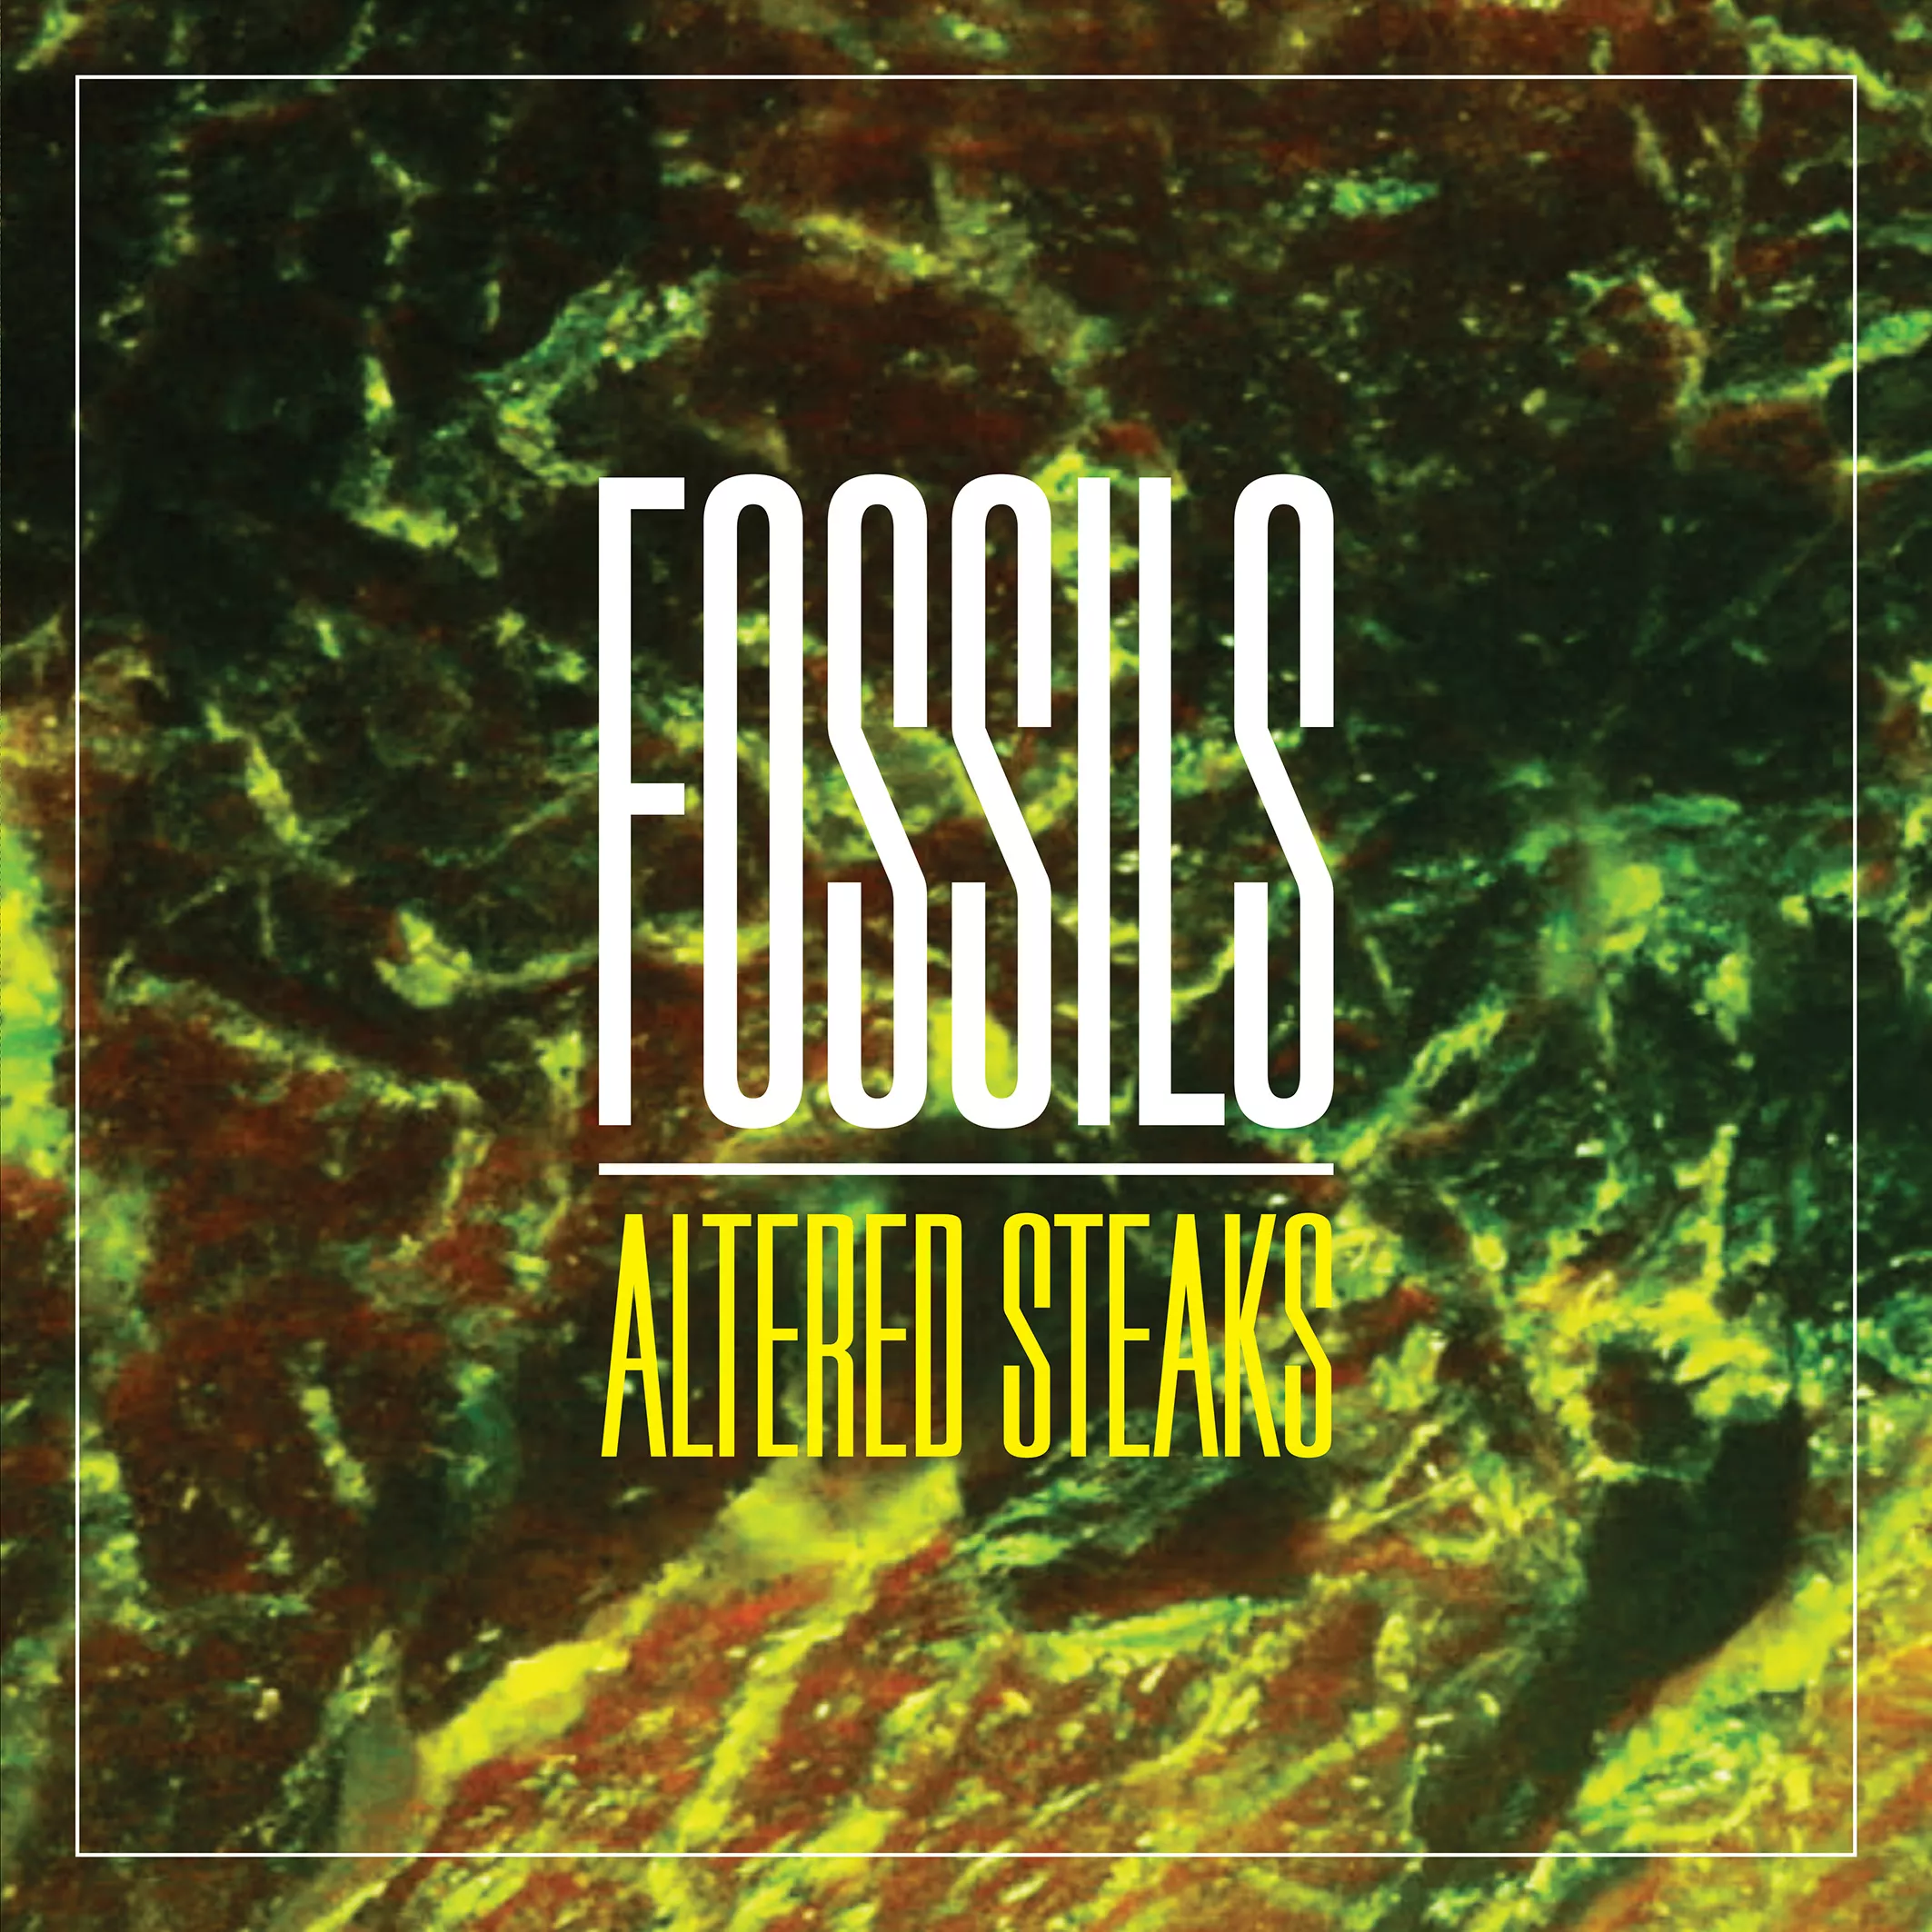 Altered Steaks - Fossils